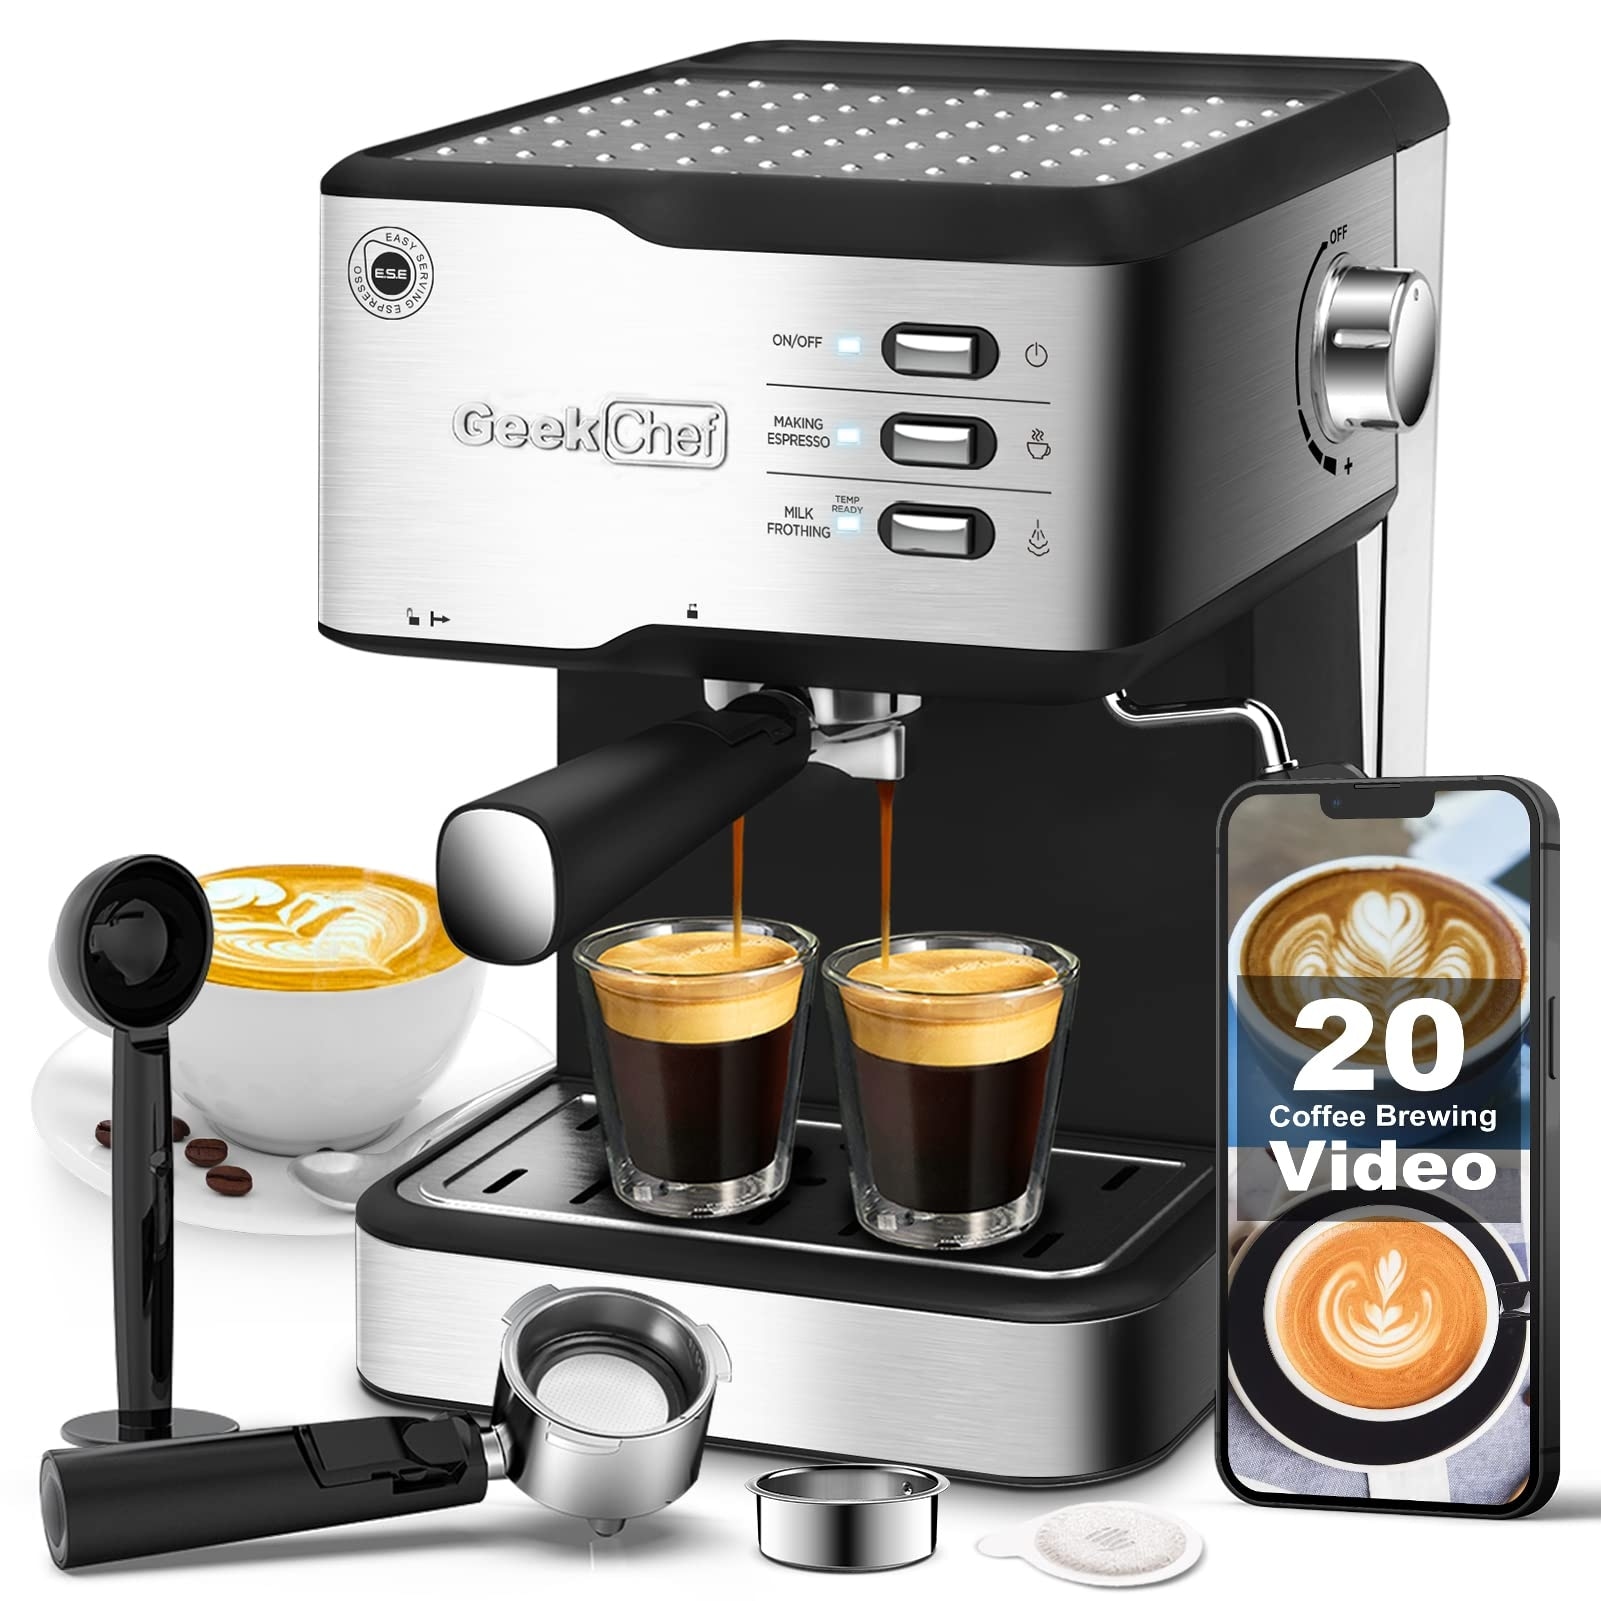 Espresso Machine 20 Bar, Cappuccino latte Maker Coffee with ESE POD capsules filter, 1.5L Water Tank, Stainless steel 950W, Grey